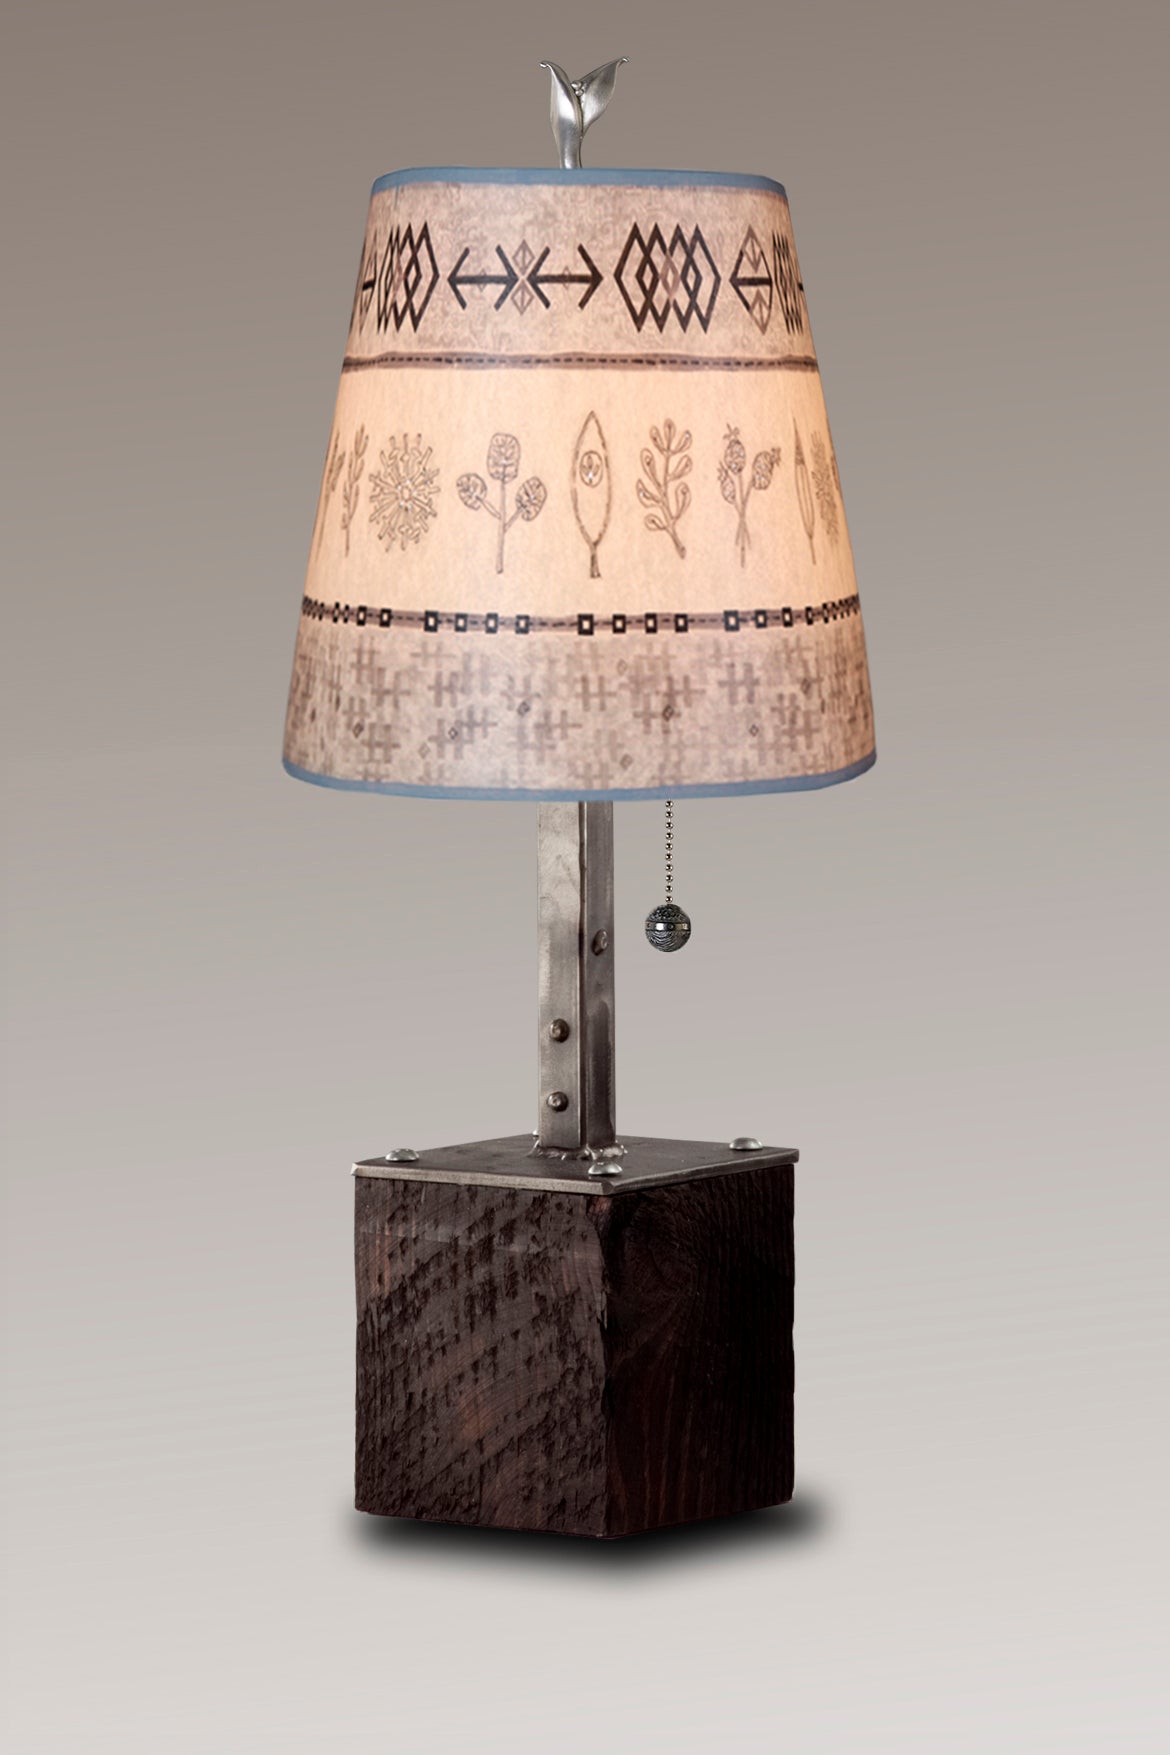 Janna Ugone &amp; Co Table Lamps Steel Table Lamp on Reclaimed Wood with Small Drum Shade in Woven &amp; Sprig in Mist